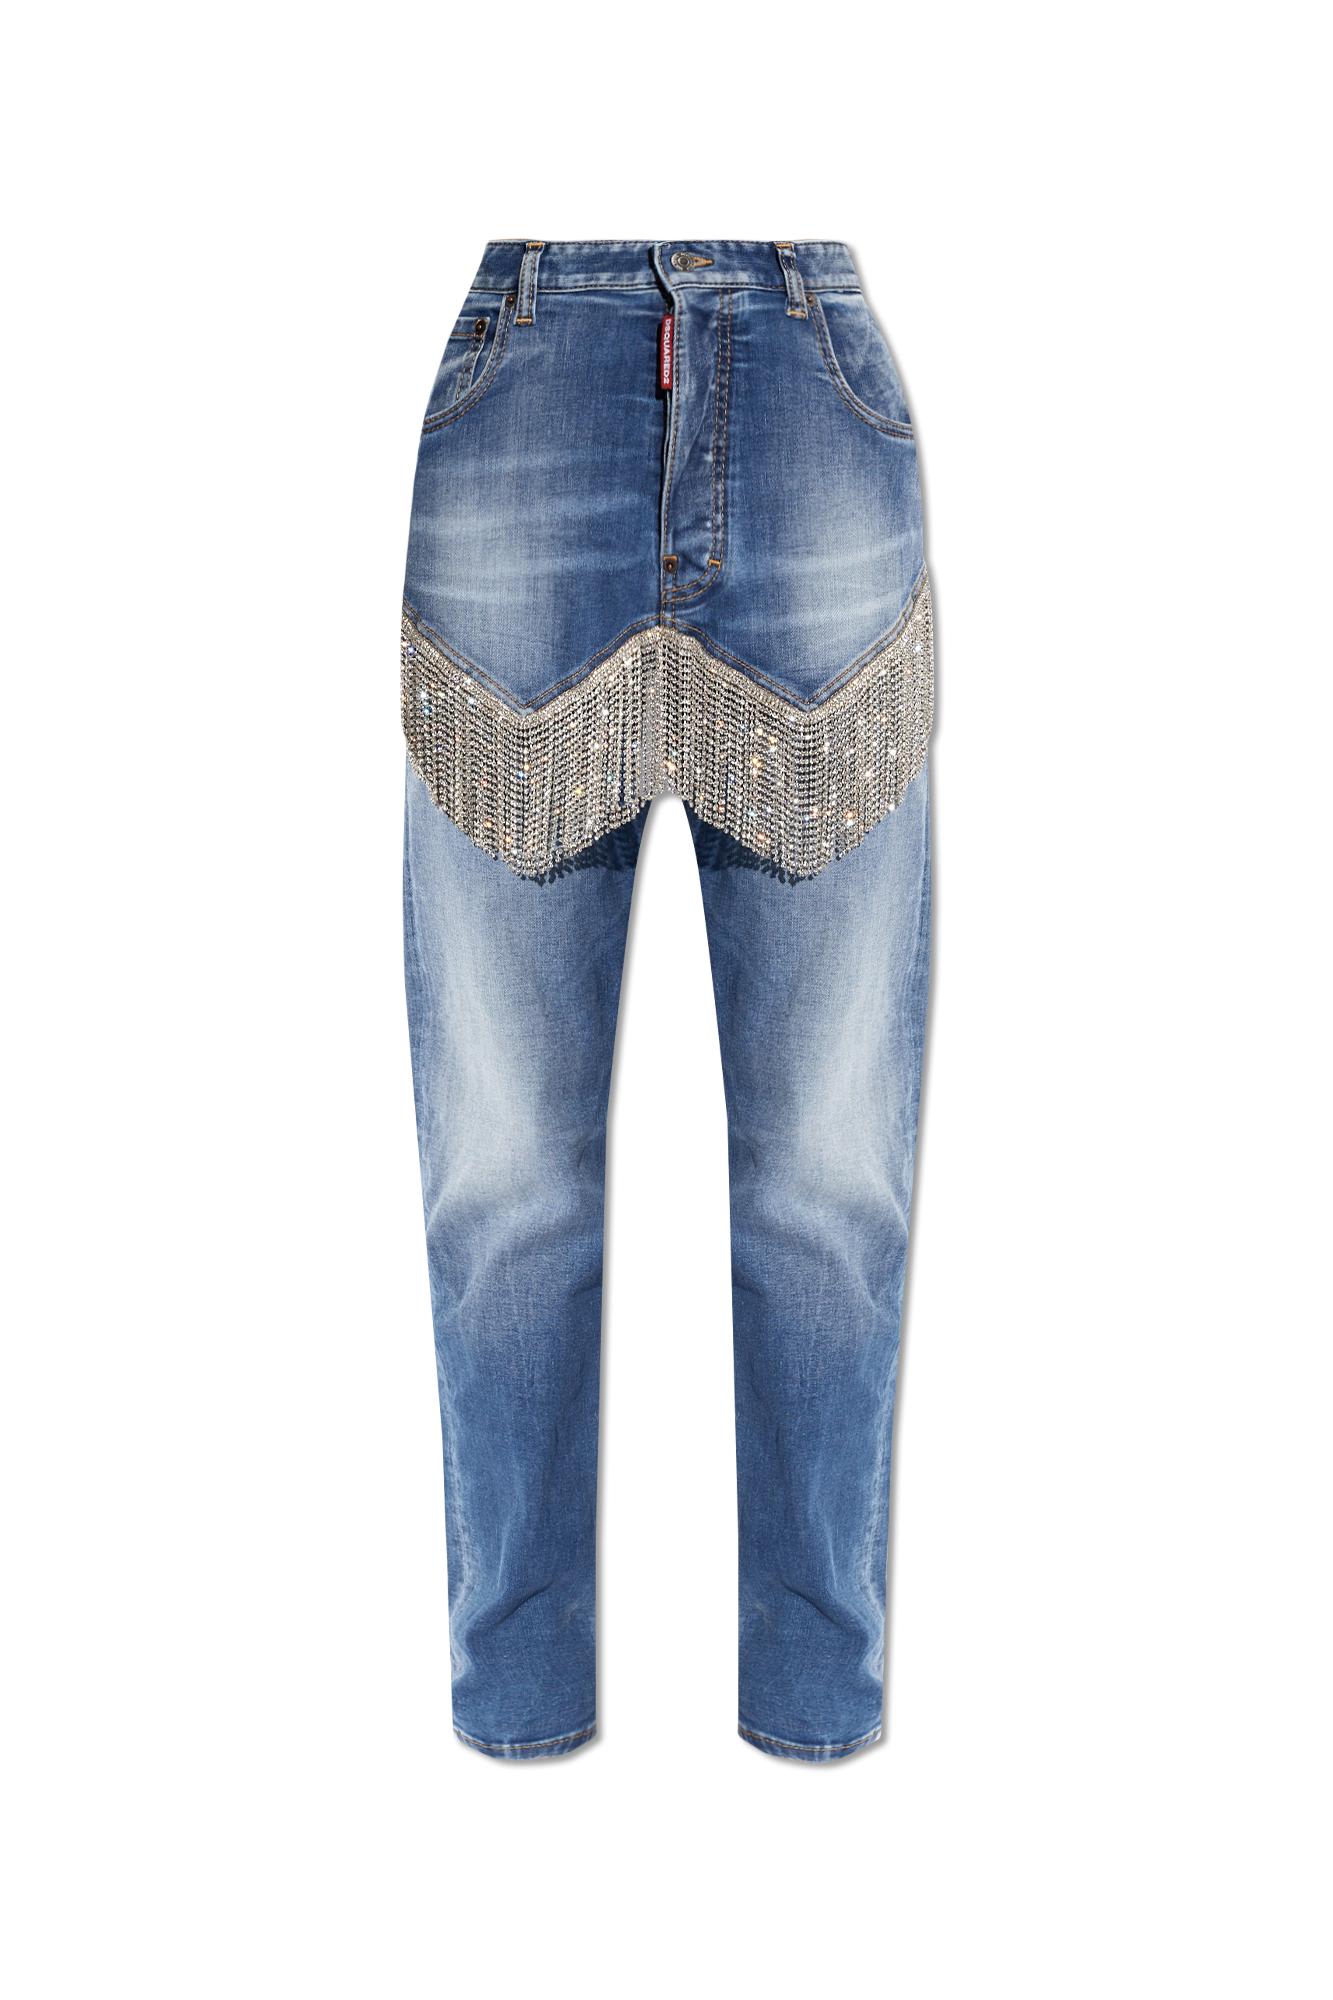 DSQUARED2 DSQUARED2 642 JEANS